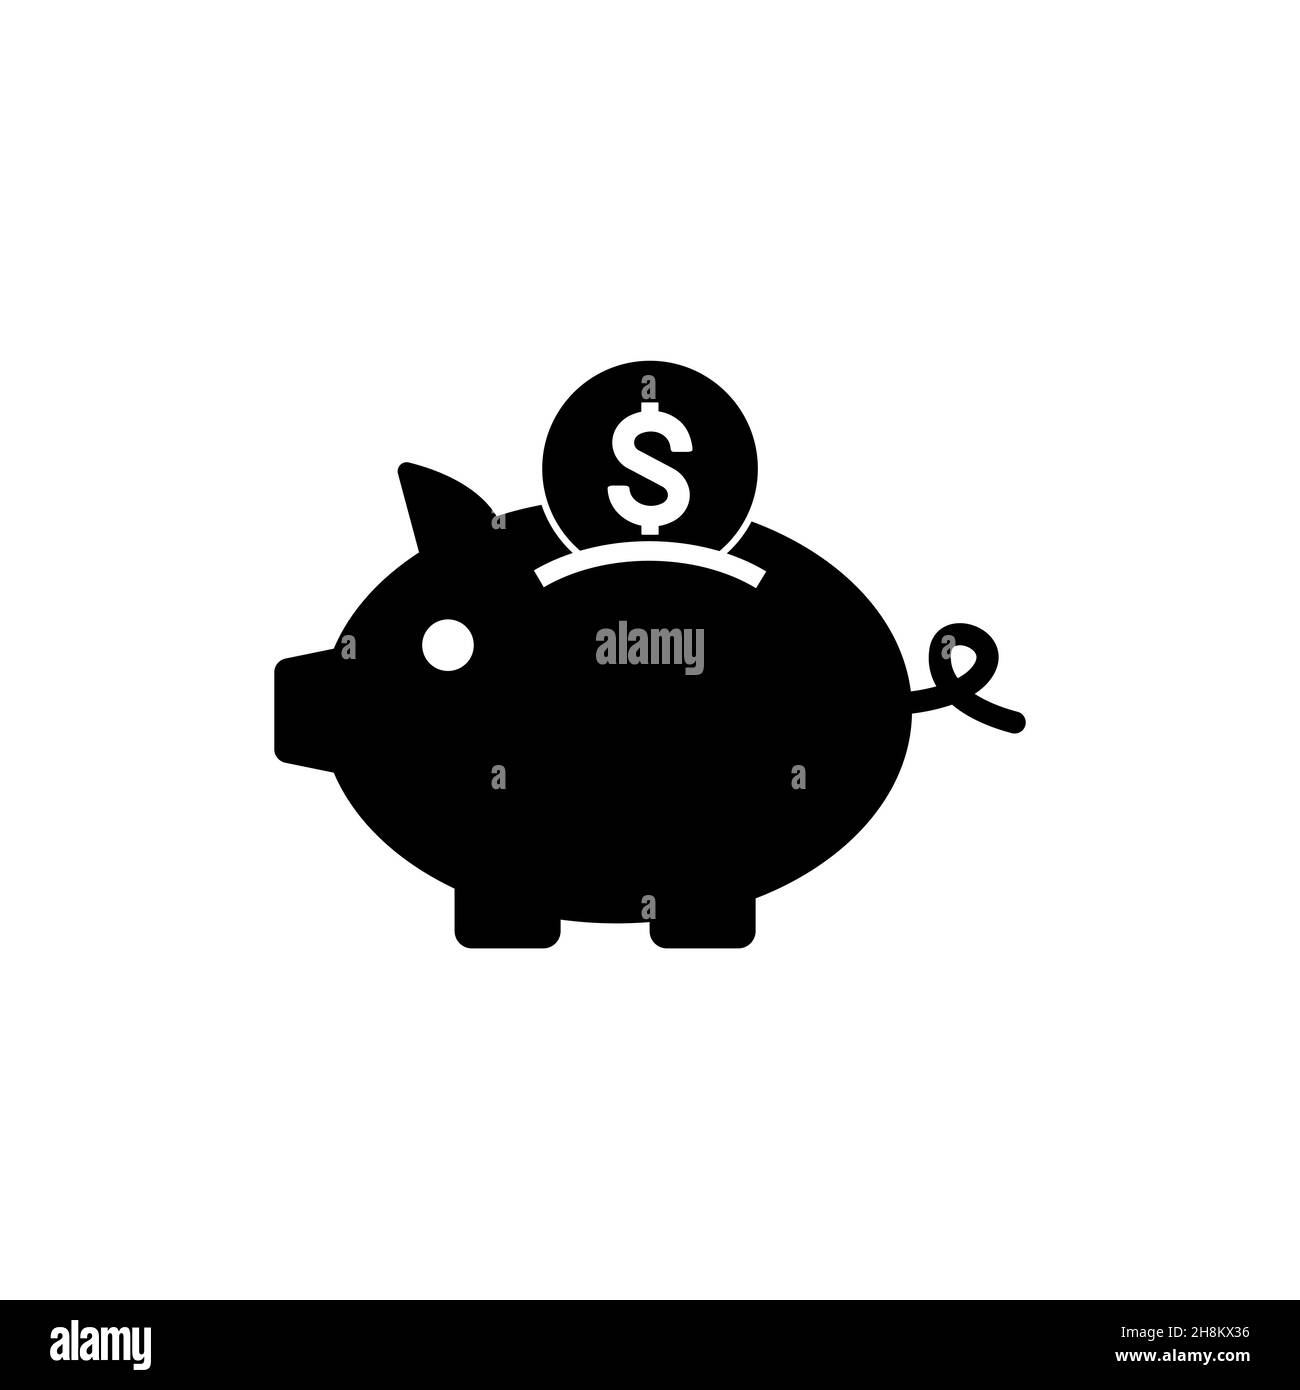 earnings. piggy bank sign with coins vector icon isolated on white background Stock Vector